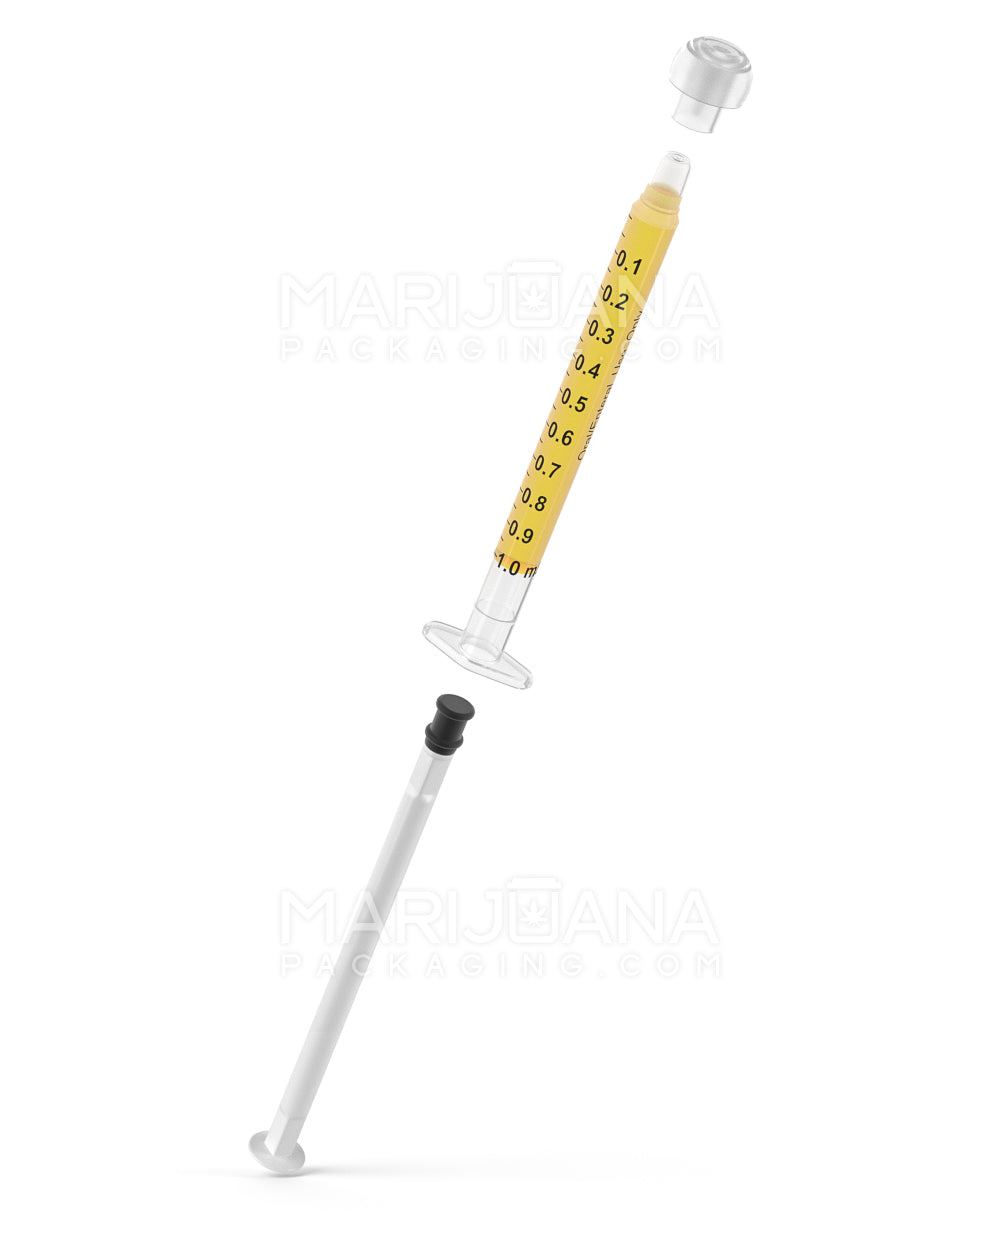 Plastic Oral Concentrate Syringes | 1mL - 0.1mL Increments - 100 Count - 7